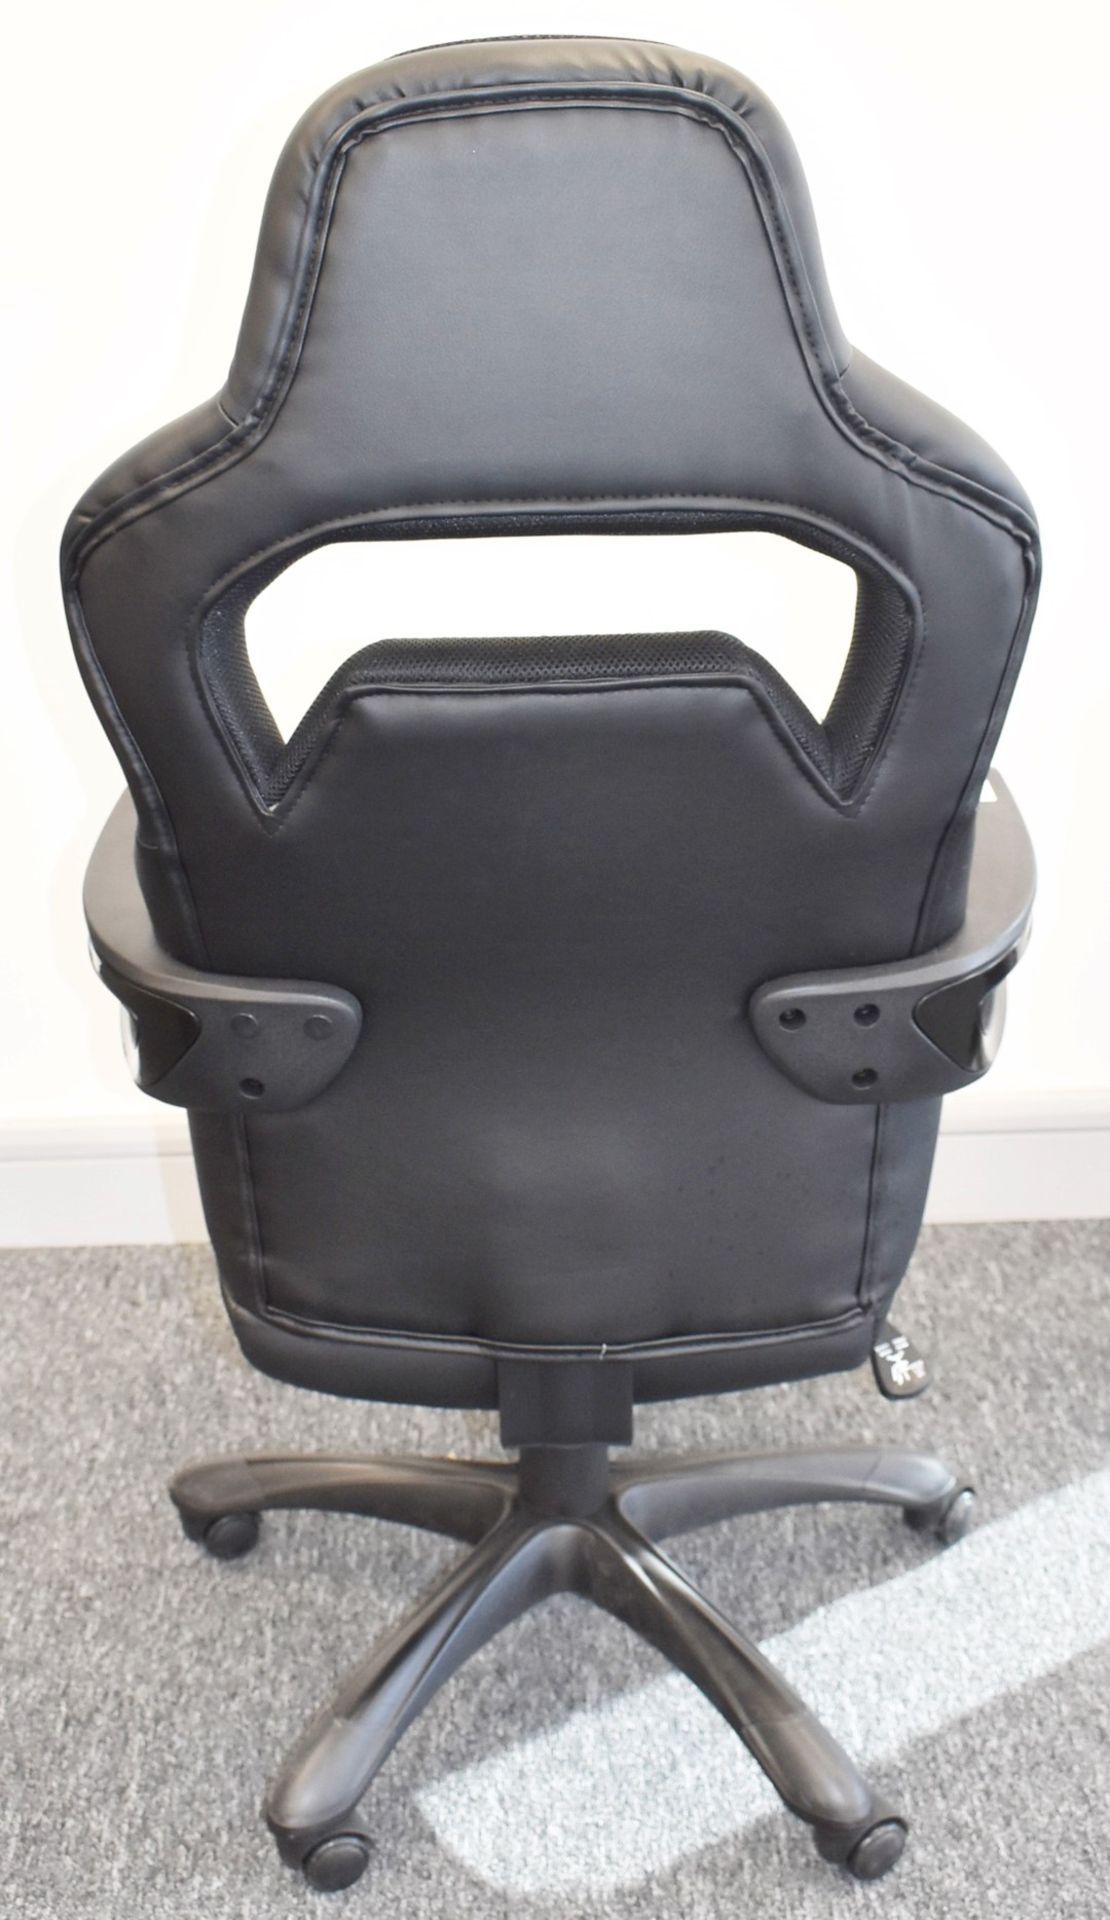 1 x Nitro Concepts Evo Gaming Swivel Chair - Faux Leather and Fabric Upholstery in Black - Gas - Image 6 of 8